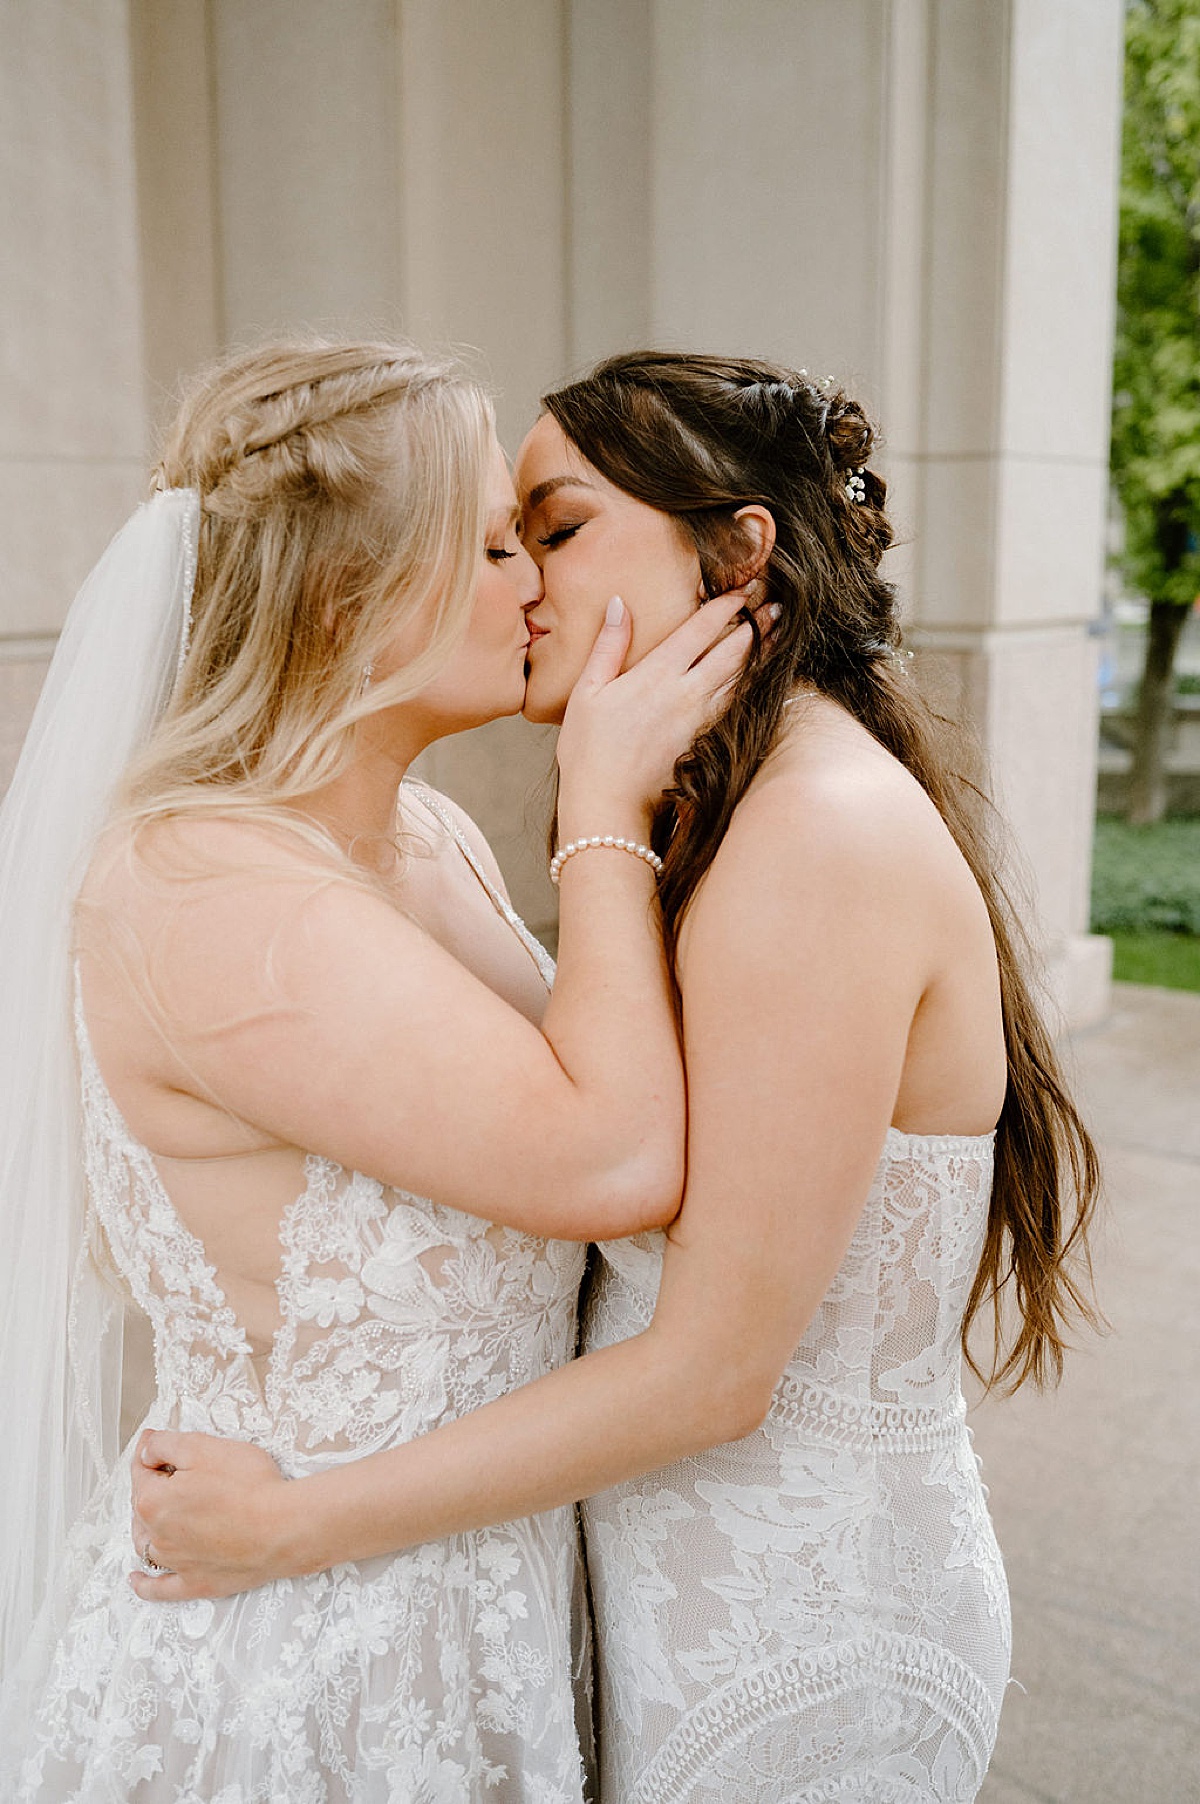 Two women in bridal gowns kiss before getting married in ceremony shot by midwest wedding photographer